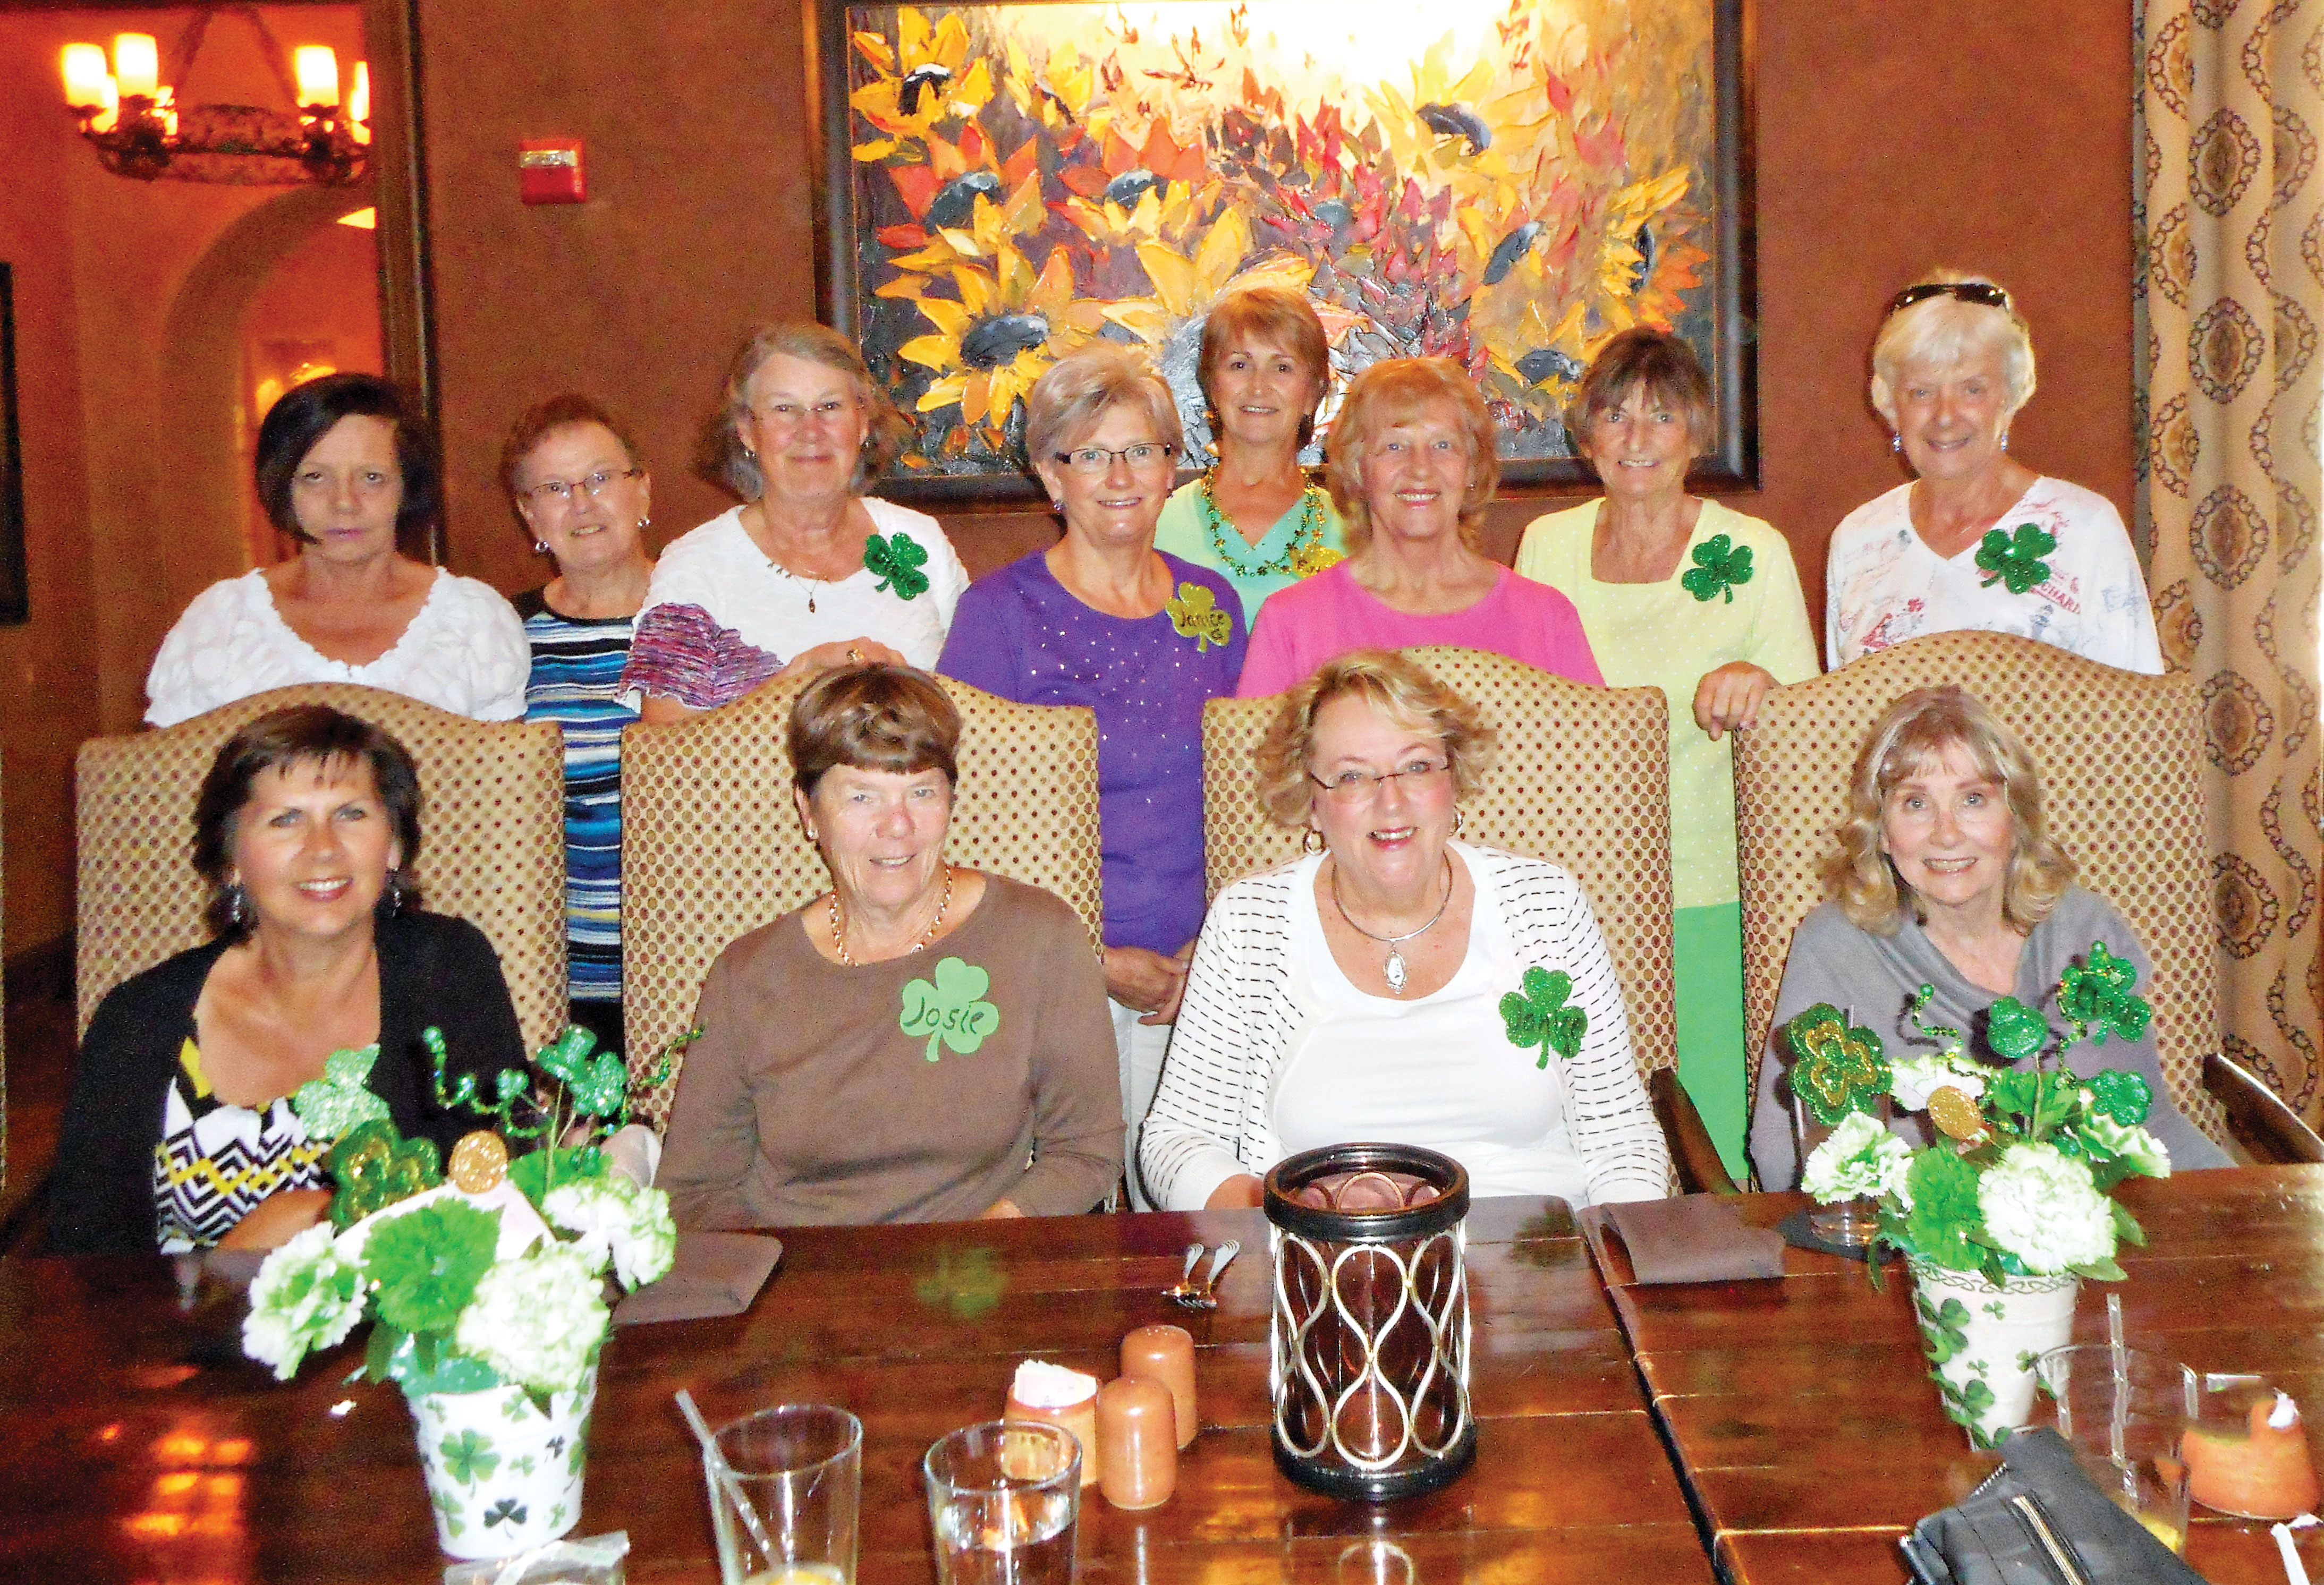 The luncheon celebration of St. Patty’s Day proved to be a very enjoyable get-together for all. Those in attendance were (top row, left to right) Arleane Dufray, Janell Jenson, Diane Buchanan, Janice Gerhardt, Esther West, Sharon Easton, Jo Thorsen and Judie Harden; (seated) Elna Friesen, Josie Montgomery, Janice Adamek and Linda Rouillard.